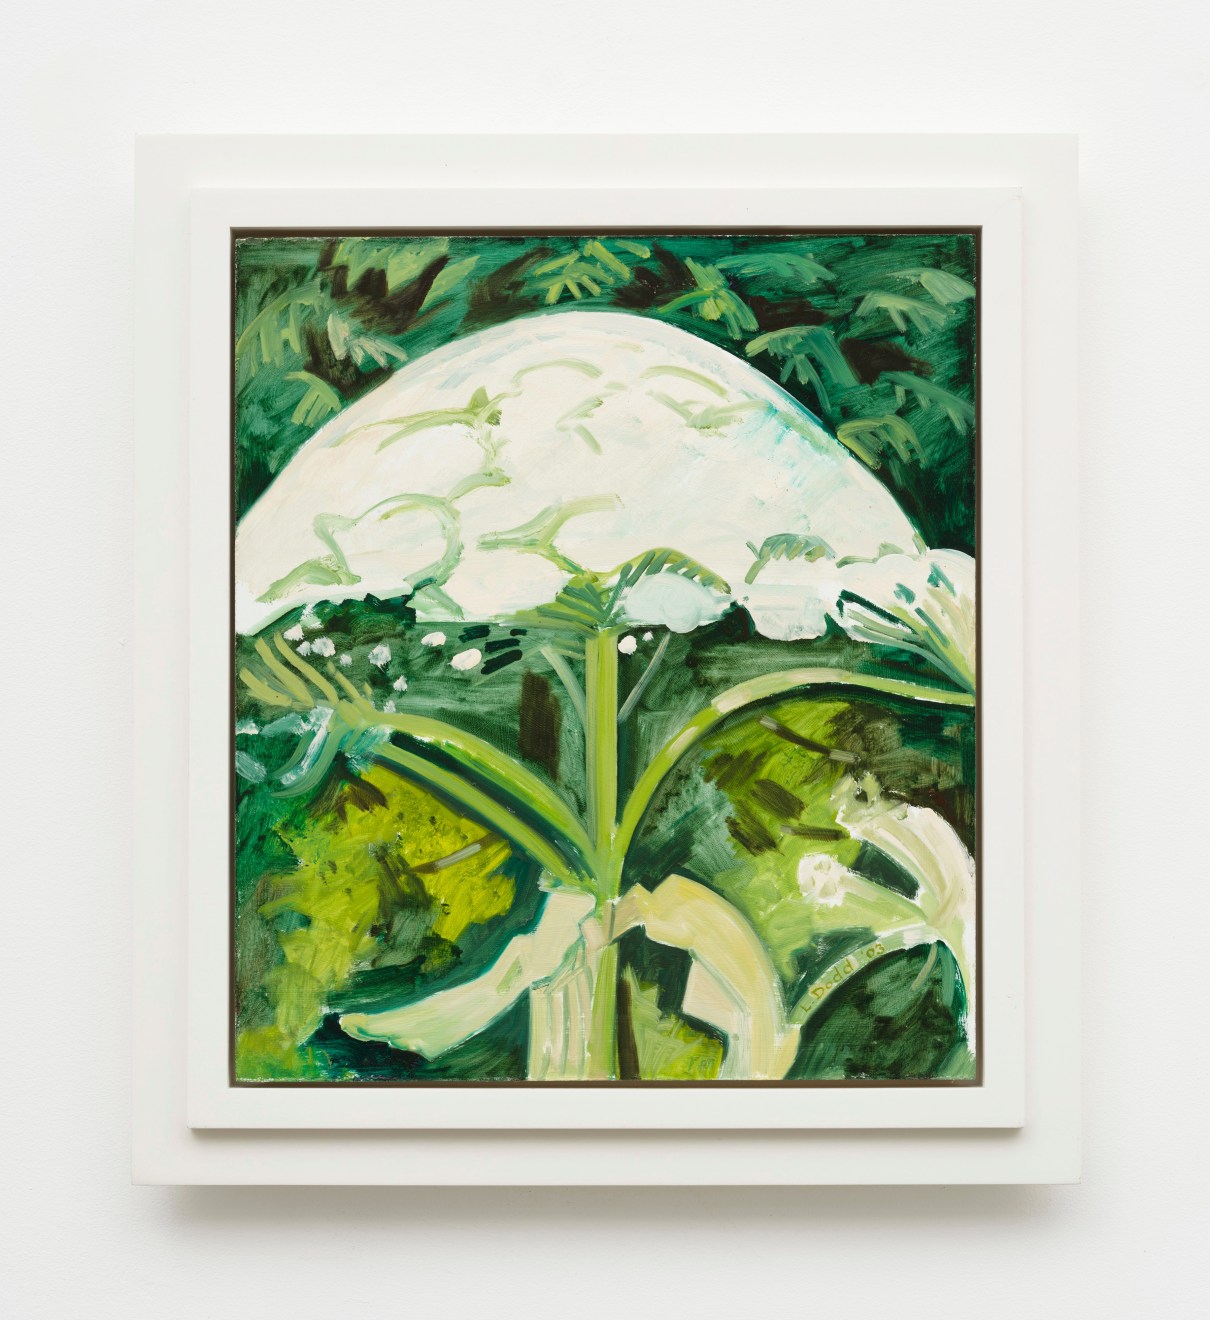 Lois Dodd, Cow Parsnip in Early Stage of Bloom, 2003